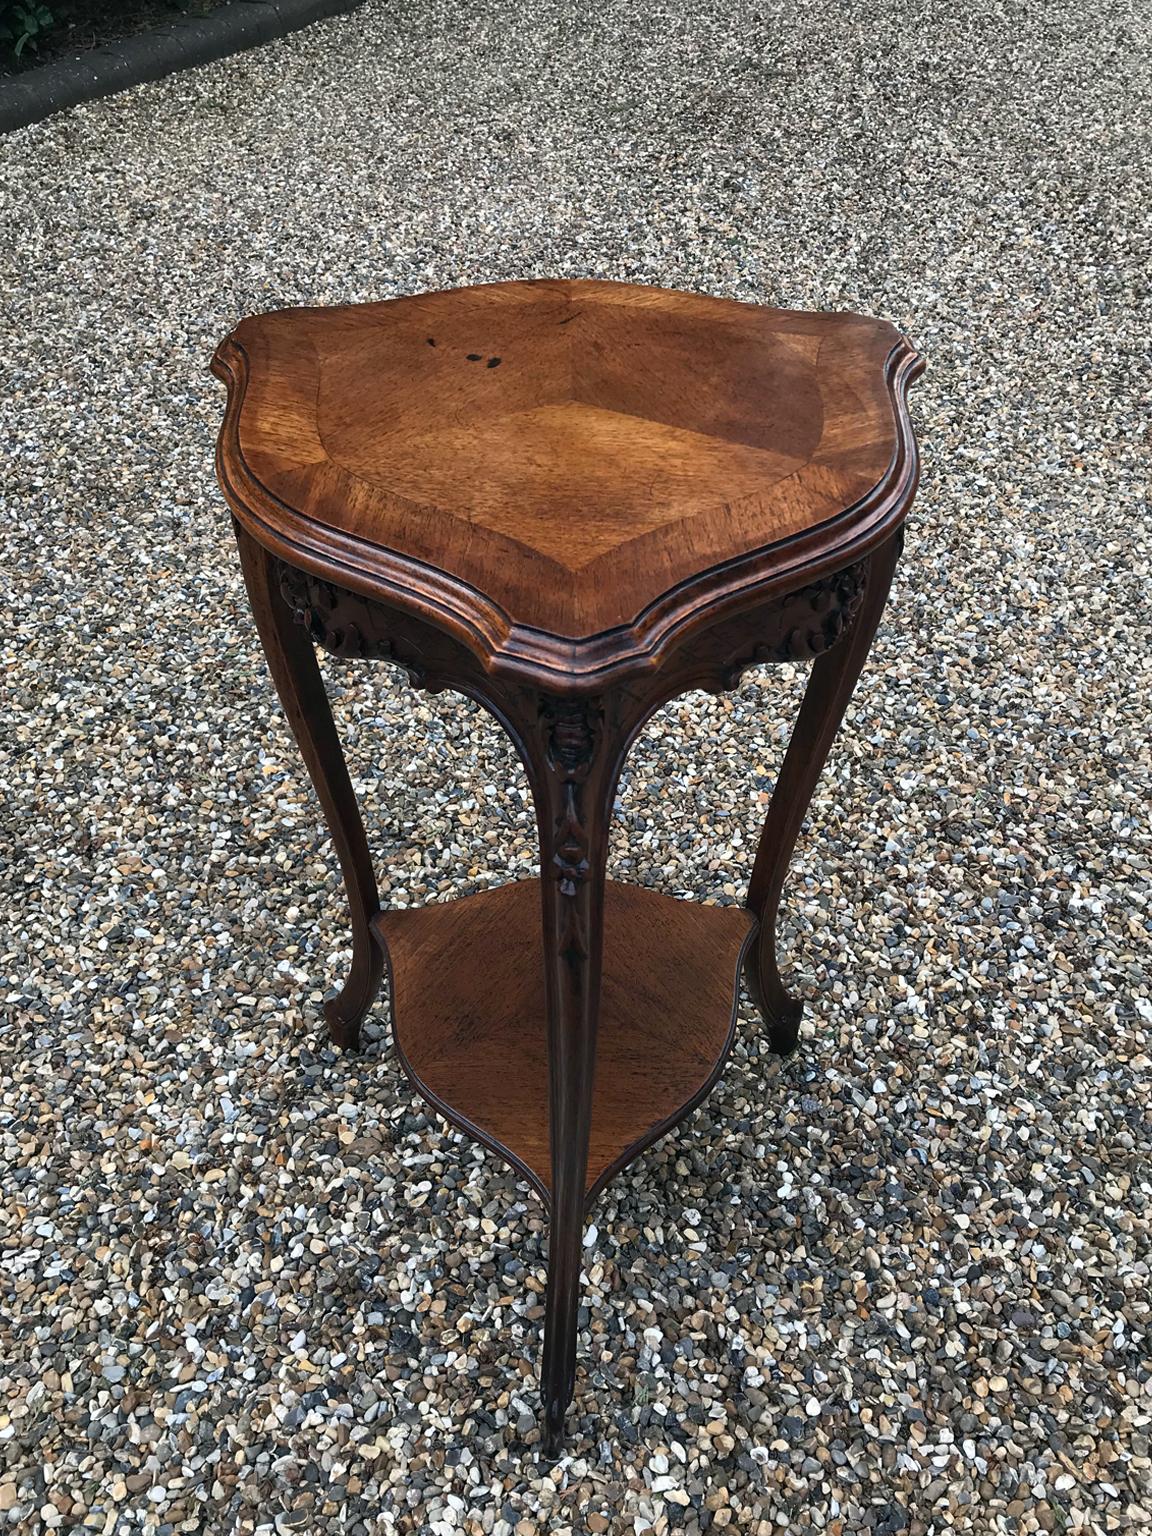 19th century Victorian carved walnut shield shaped occasional table with 2 tiers, quartered veneer and crossbanded top. The apron is heavily carved with three splayed carved cabriole legs,

circa 1880

Dimensions:
Height: 27.5 inches - 70